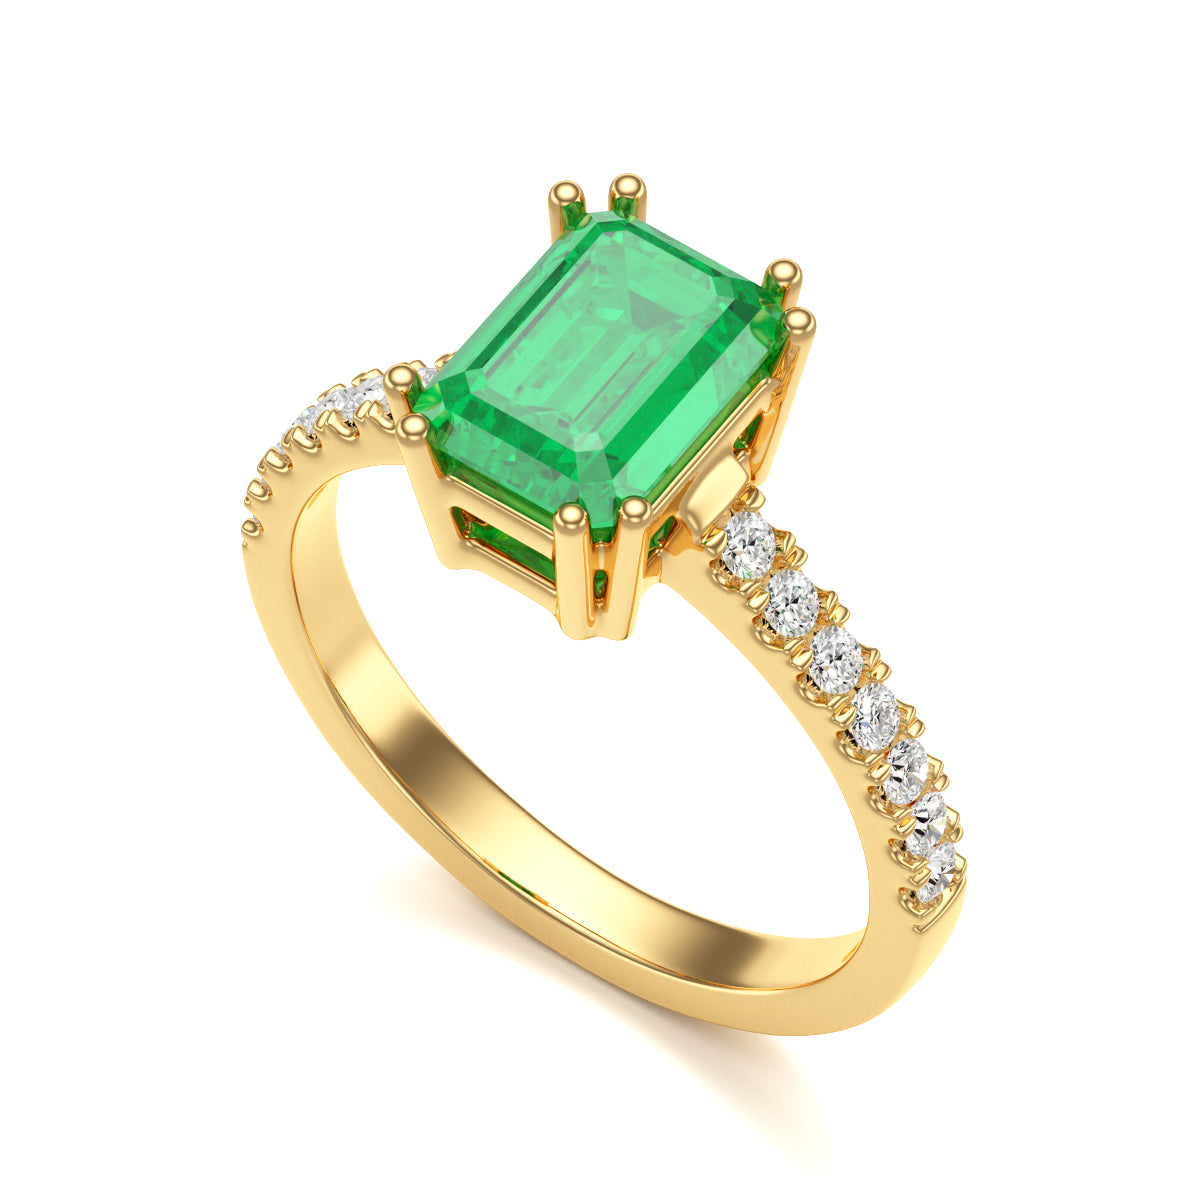 Emerald with Diamond Set Shoulders Dress Ring